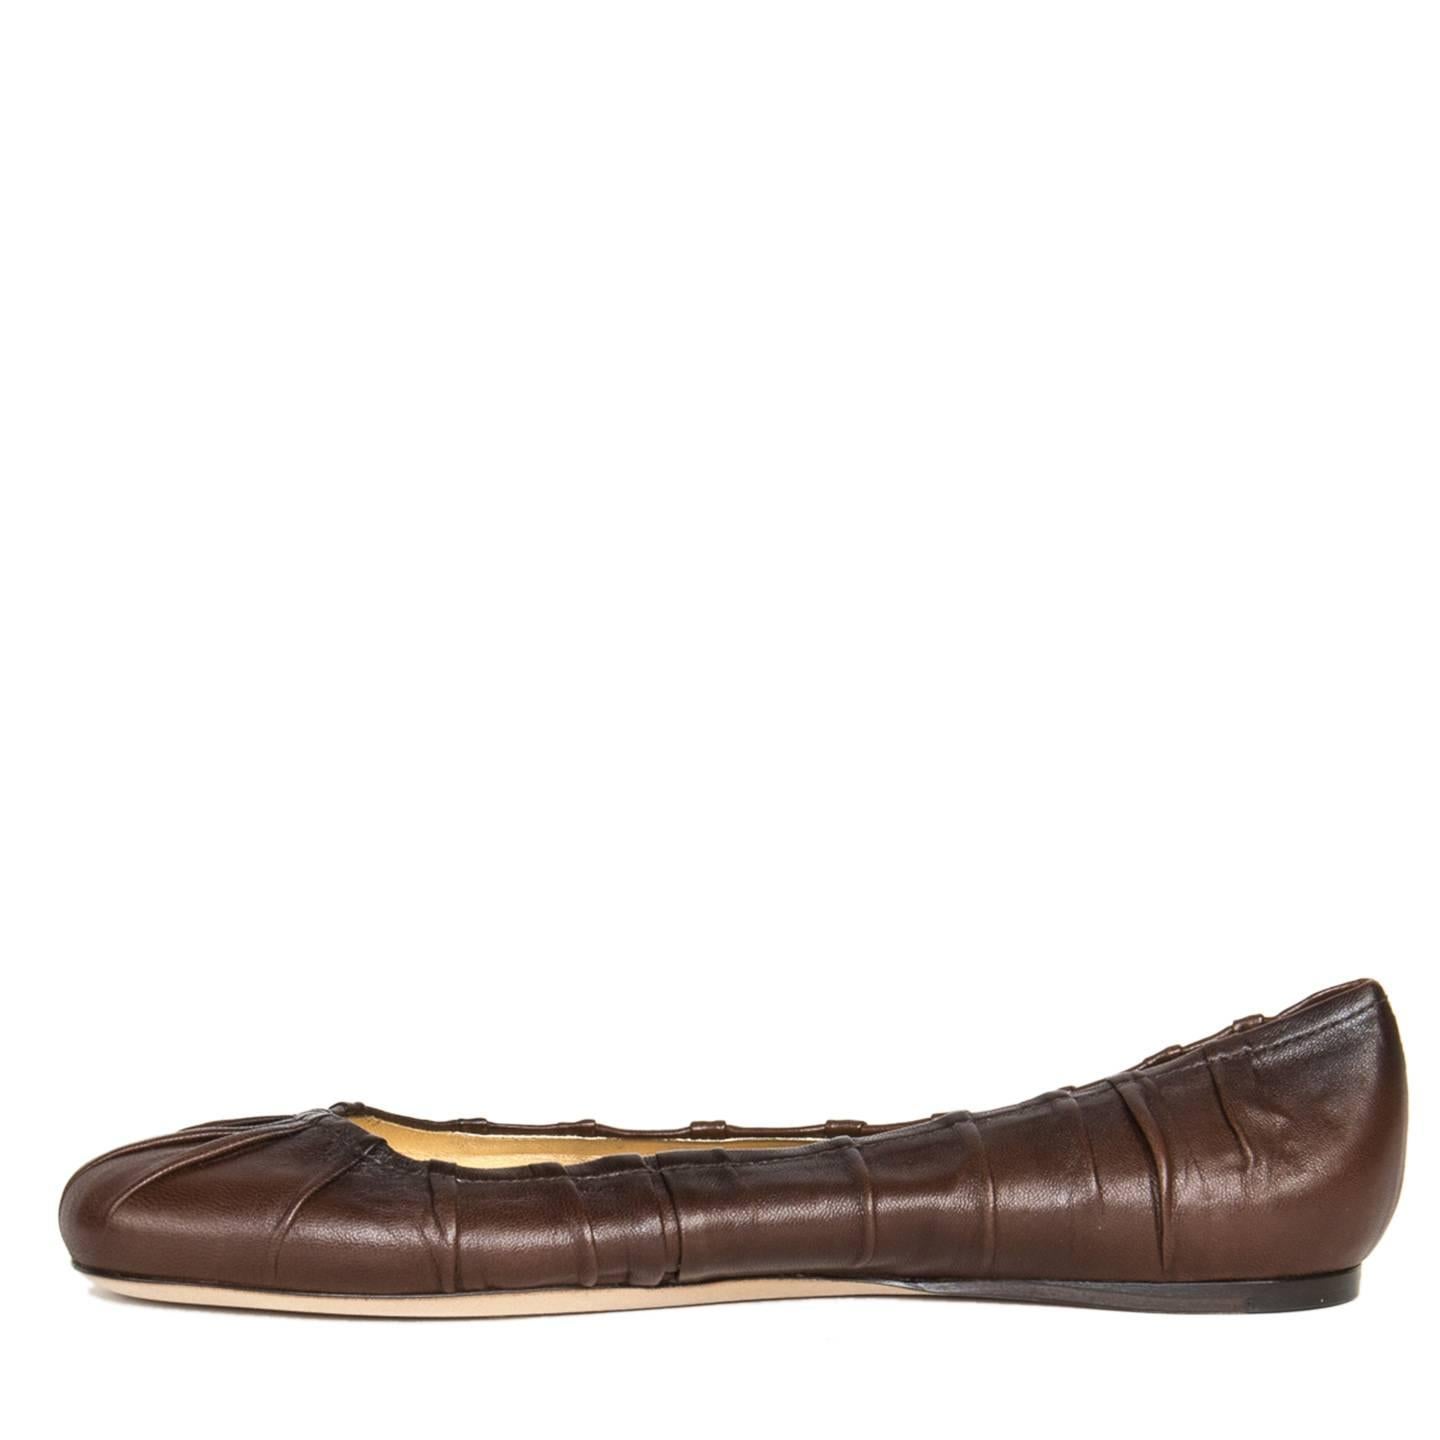 Prada Brown Leather Ballet Shoes In New Condition For Sale In Brooklyn, NY